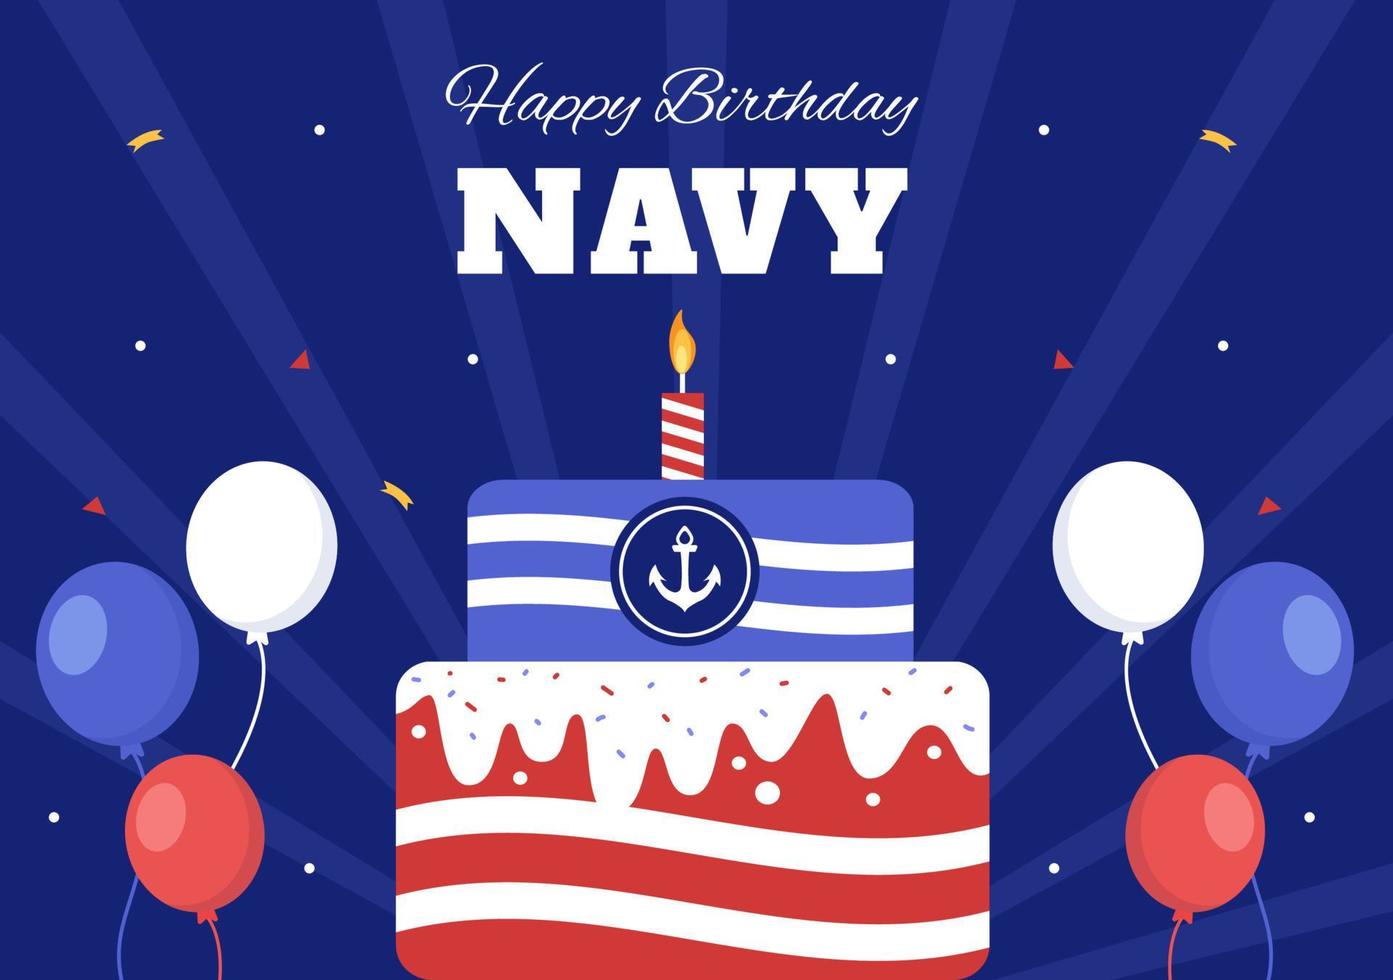 U.S. Navy Birthday on October 13th Hand Drawn Cartoon Flat  Illustration Suitable for Poster, Banners and Greeting Card in Background Style vector